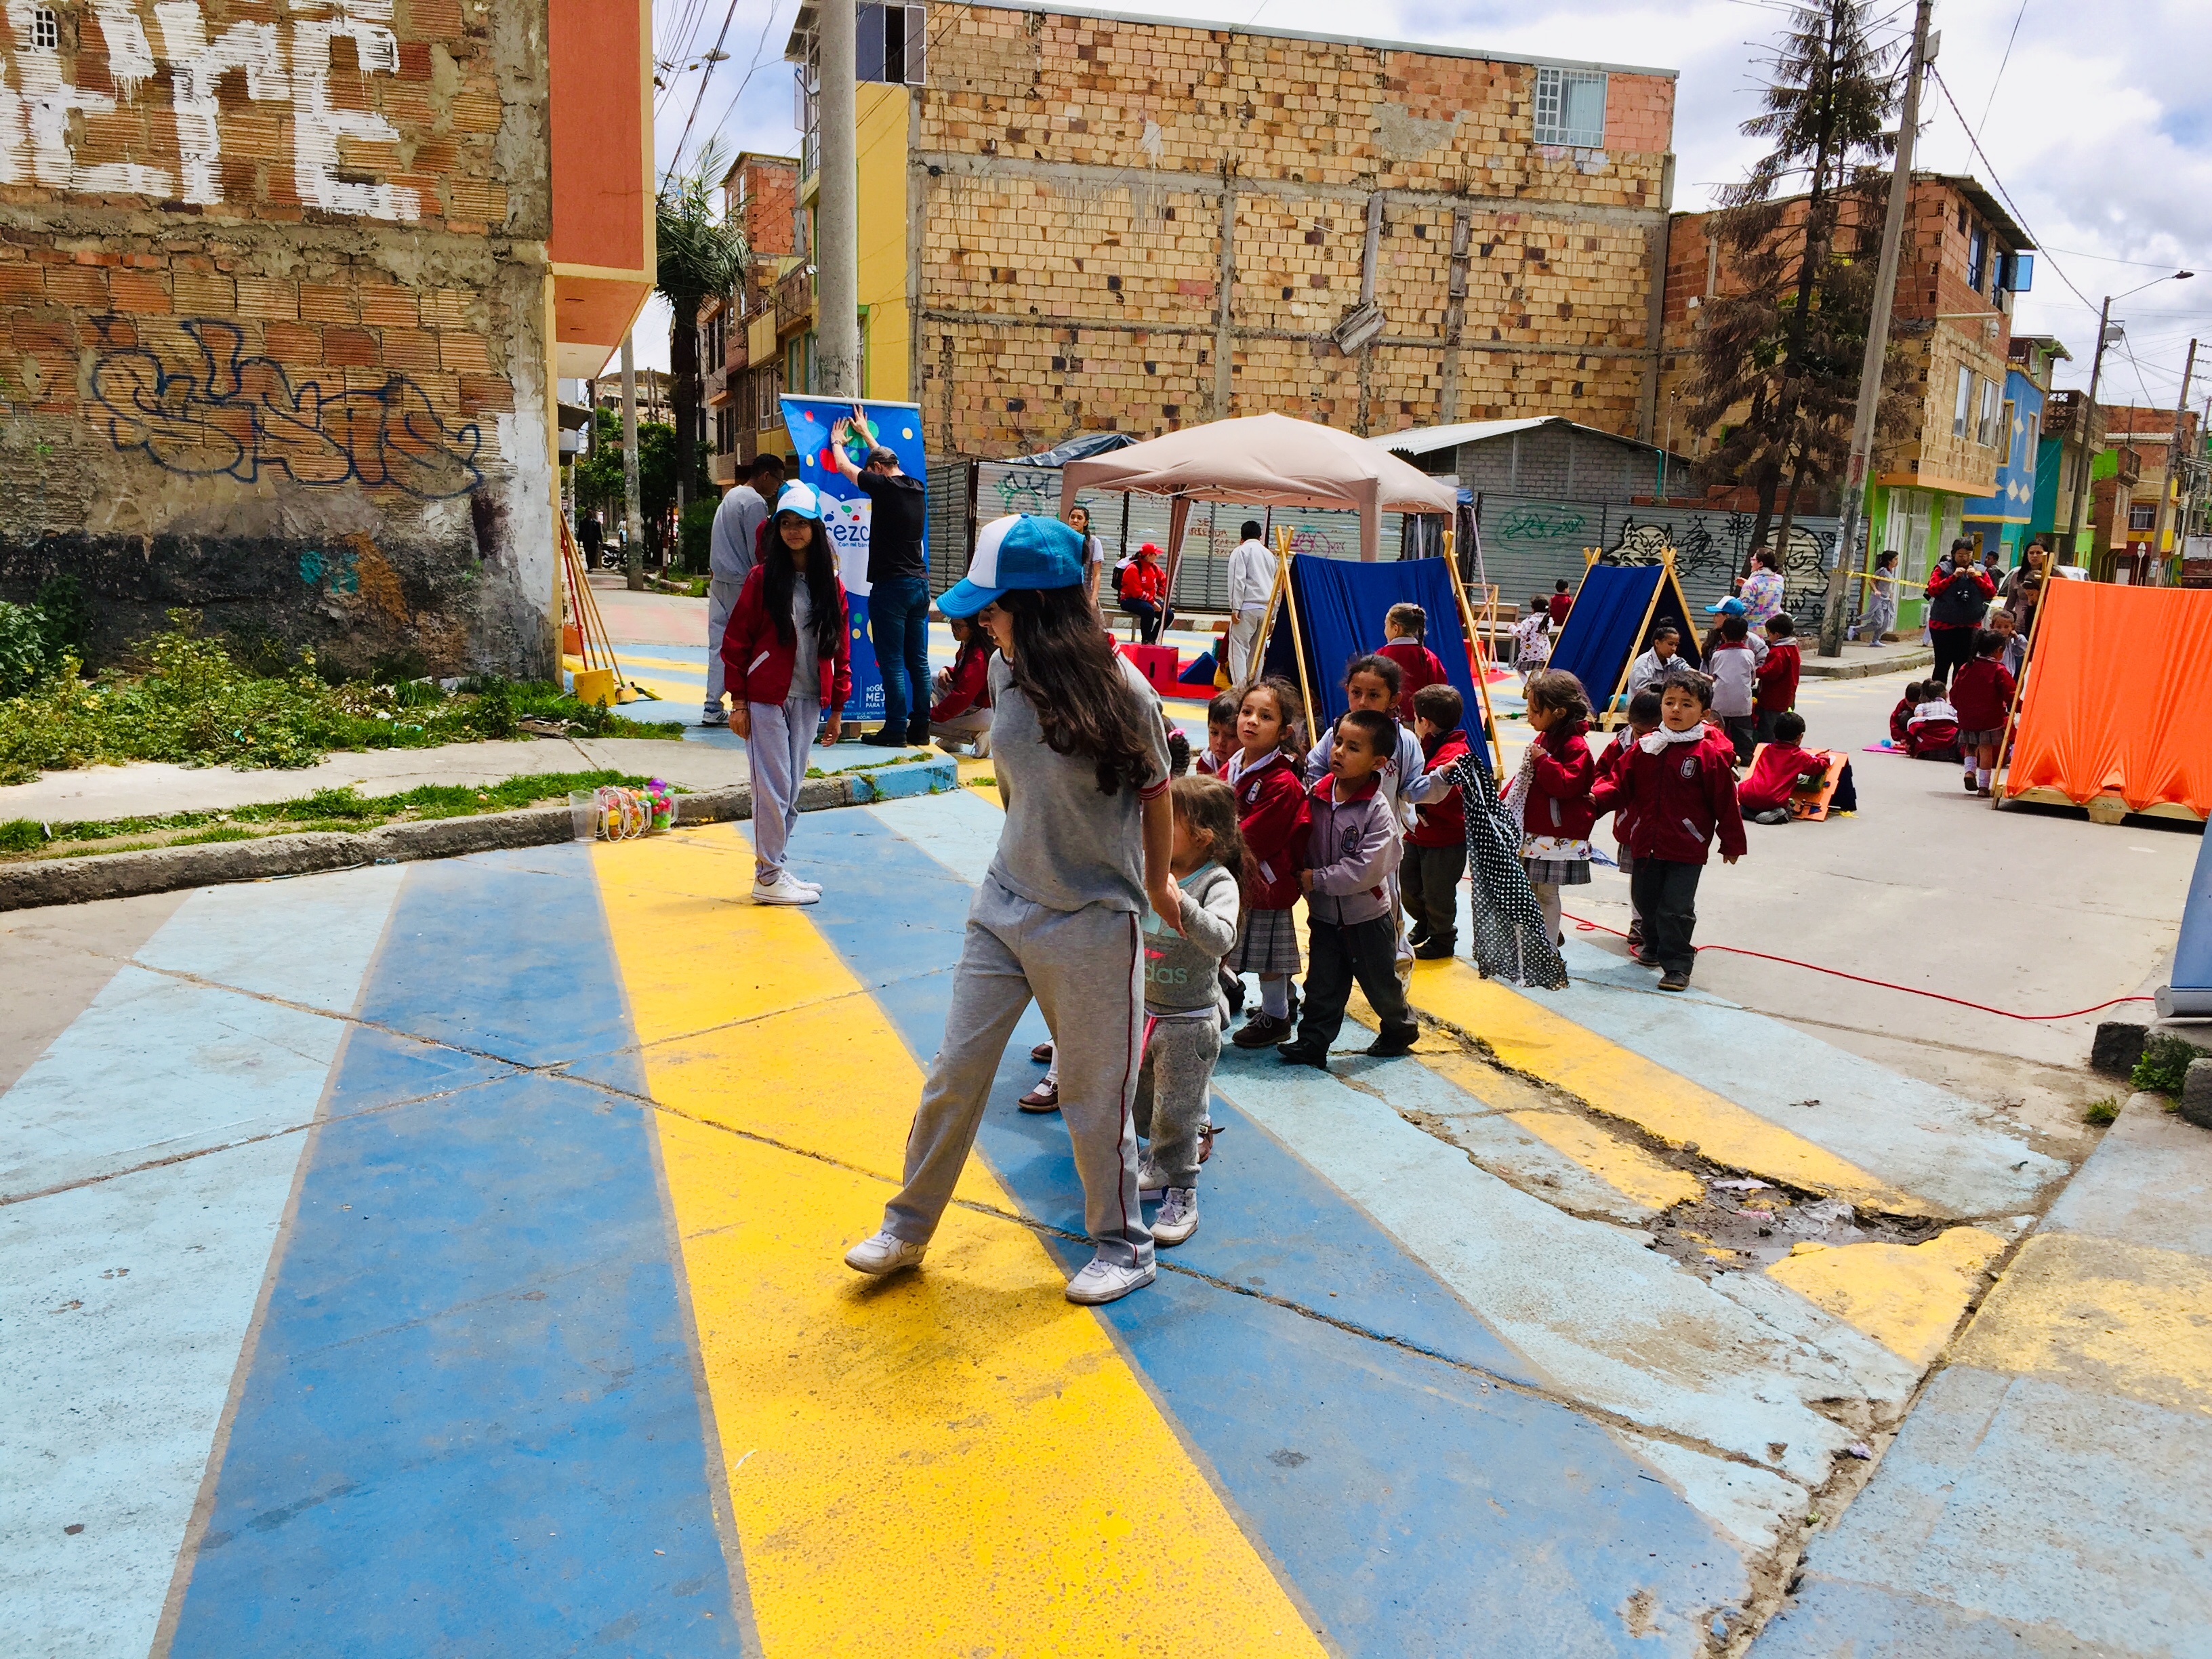 copy_of_a_teen_of_urban95_bogota_leads_school_children_through_a_playstreet_day_streets_are_closed_and_children_are_welcomed_out_for_games_and_toys._photo_taken_by_kali_silverman_2018.jpg